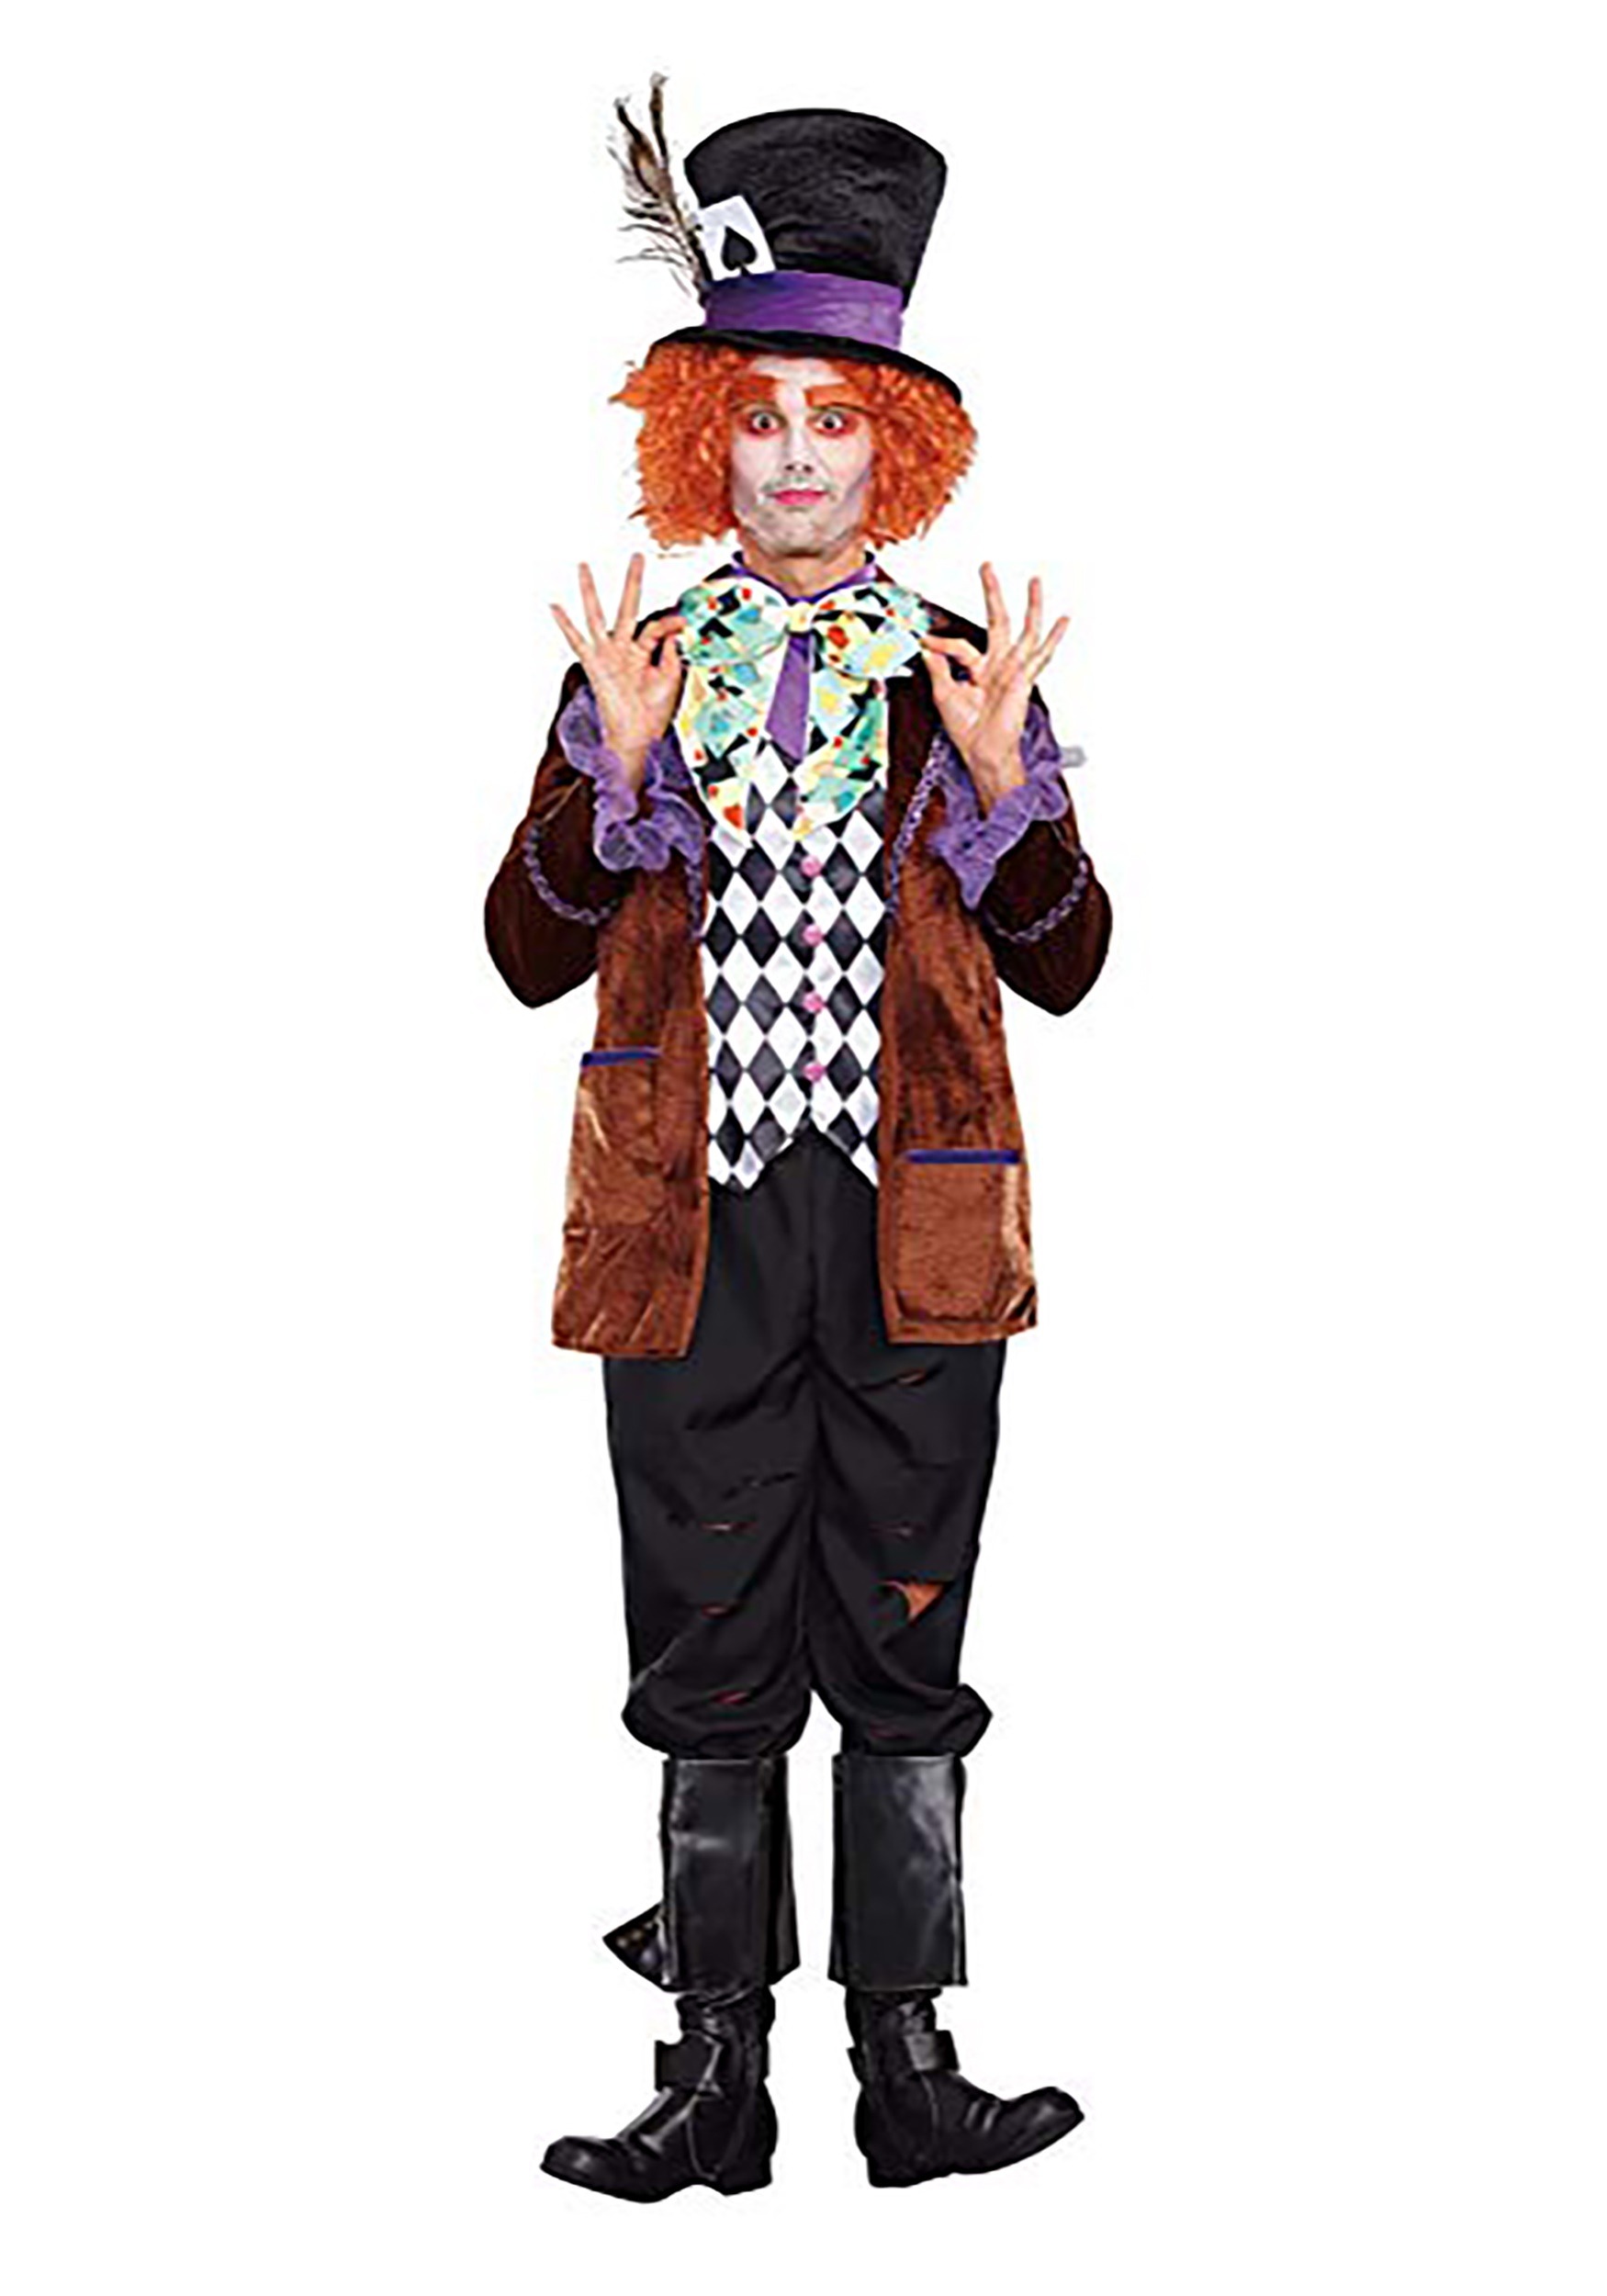 Hatter Madness Silly Costume for Men